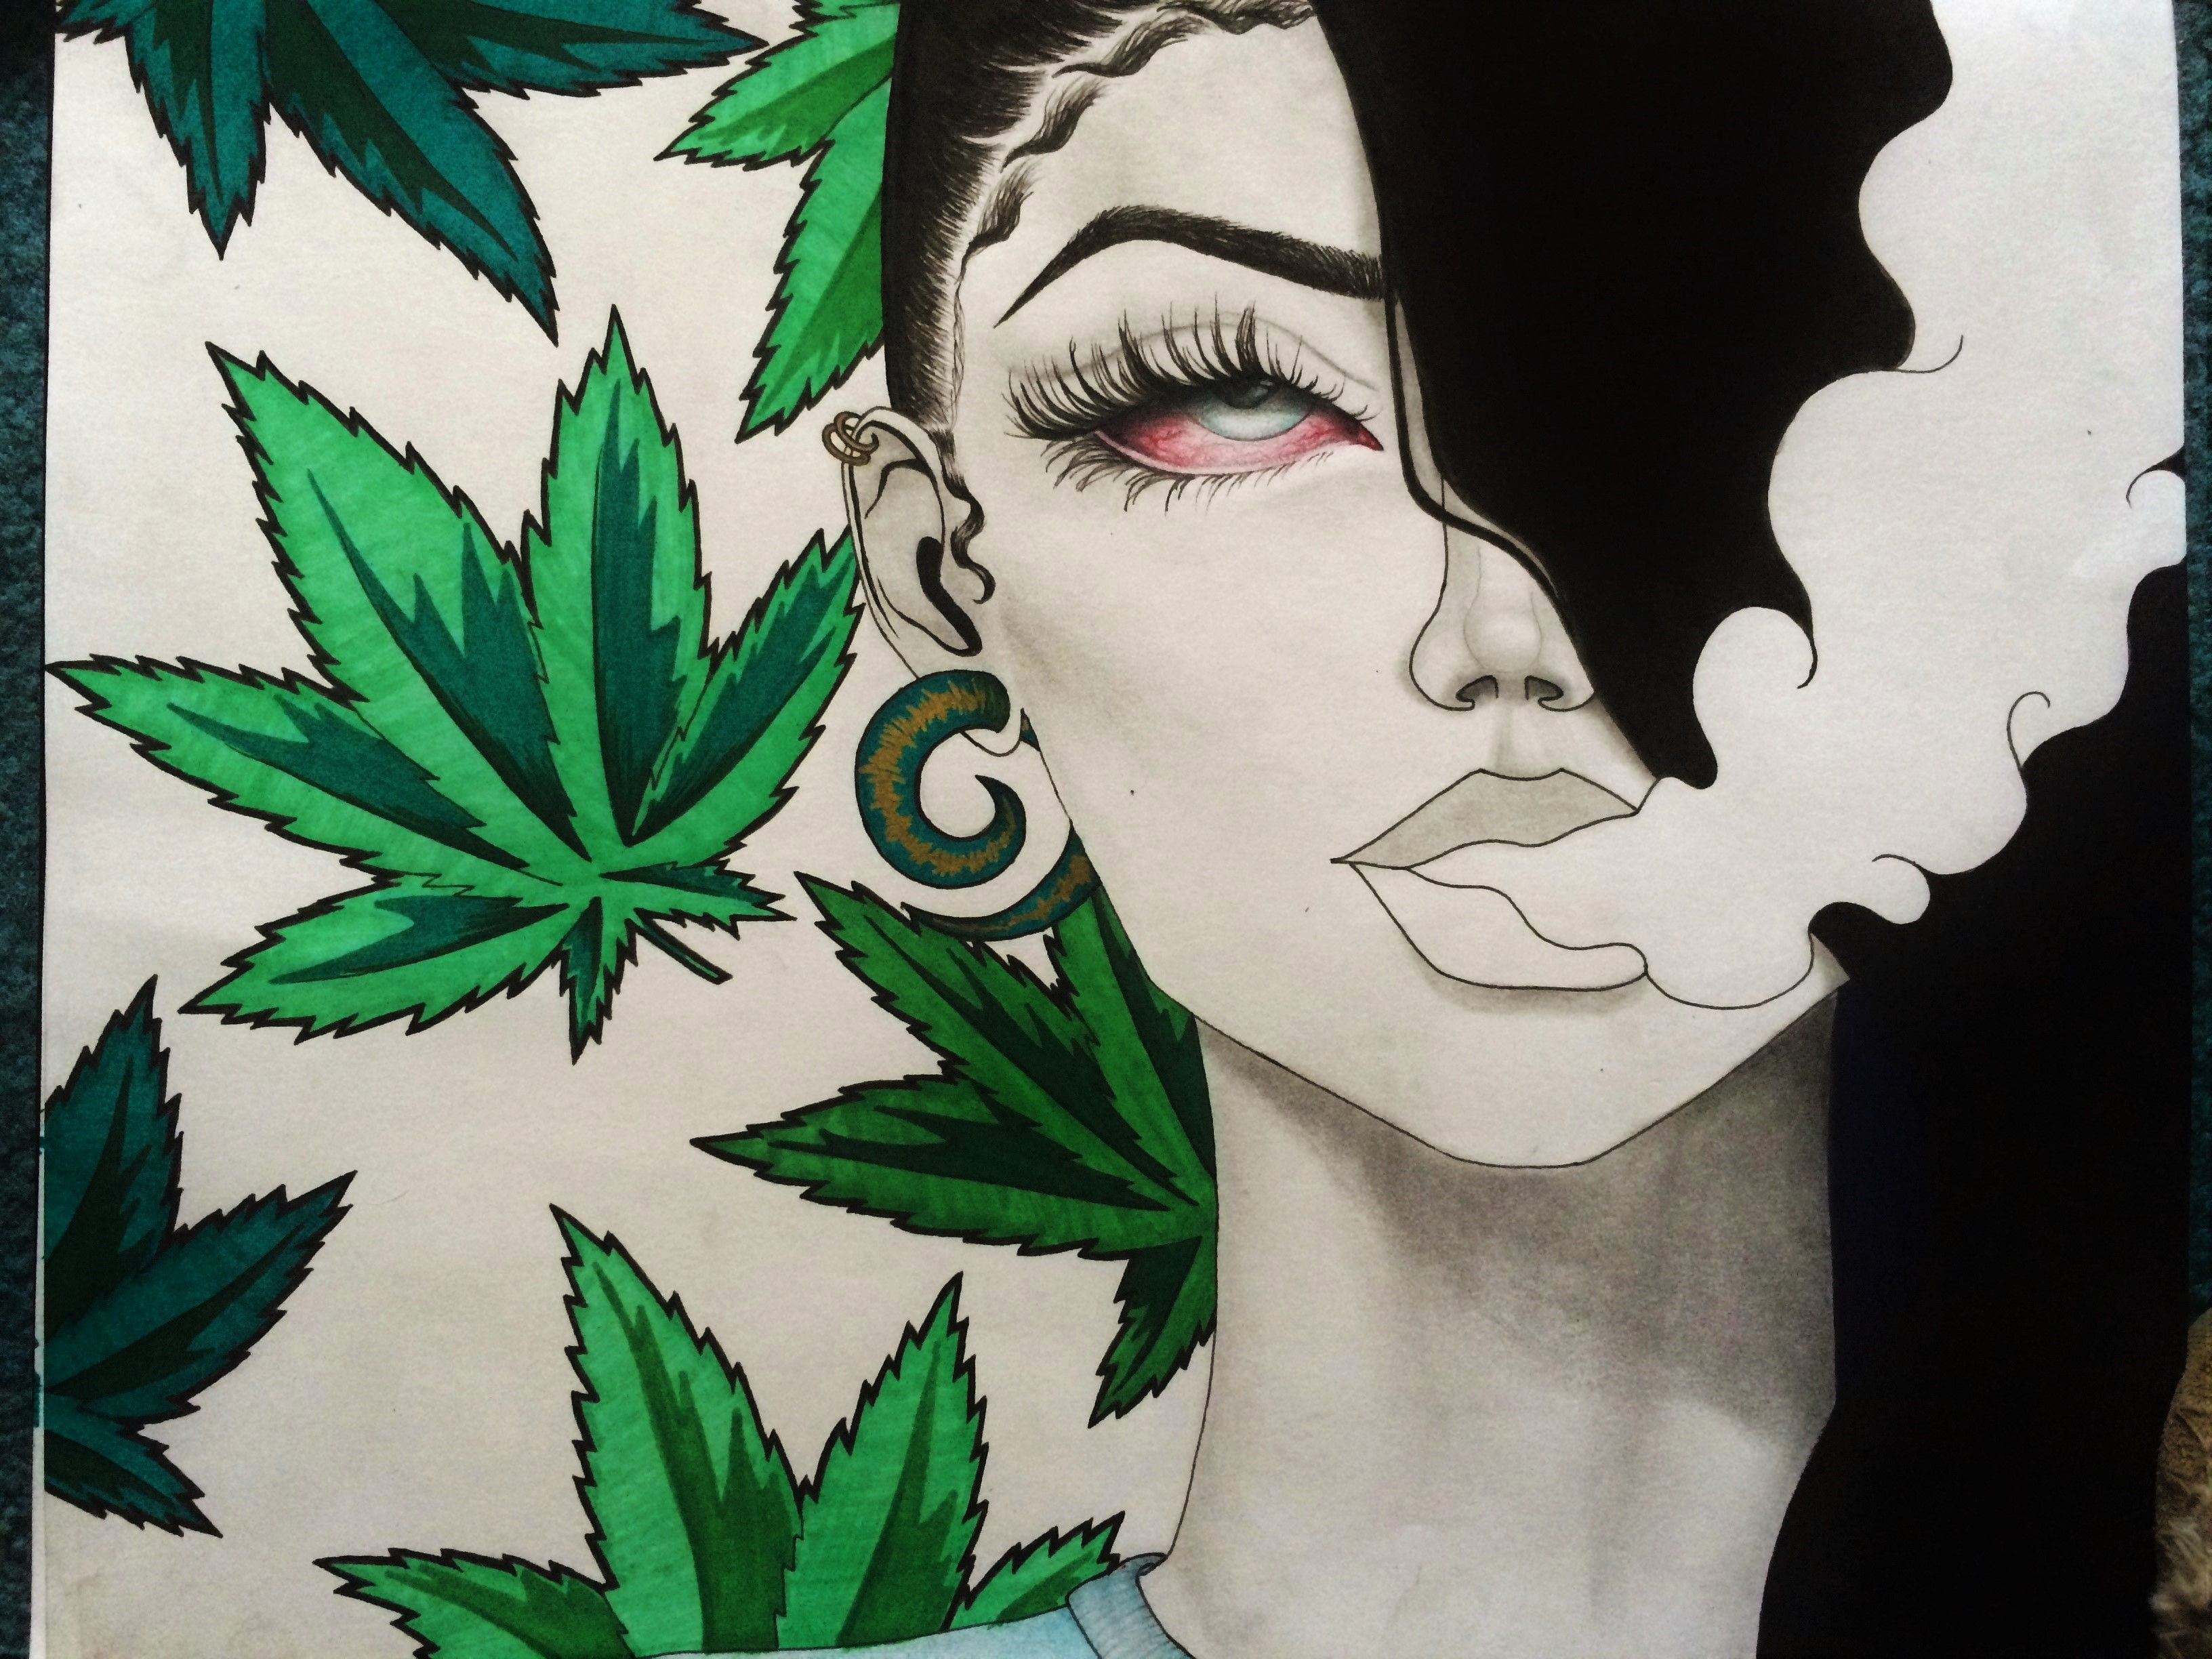 Download Drawings Of Girls Smoking Weed On Itl.cat from www.itl.cat. 